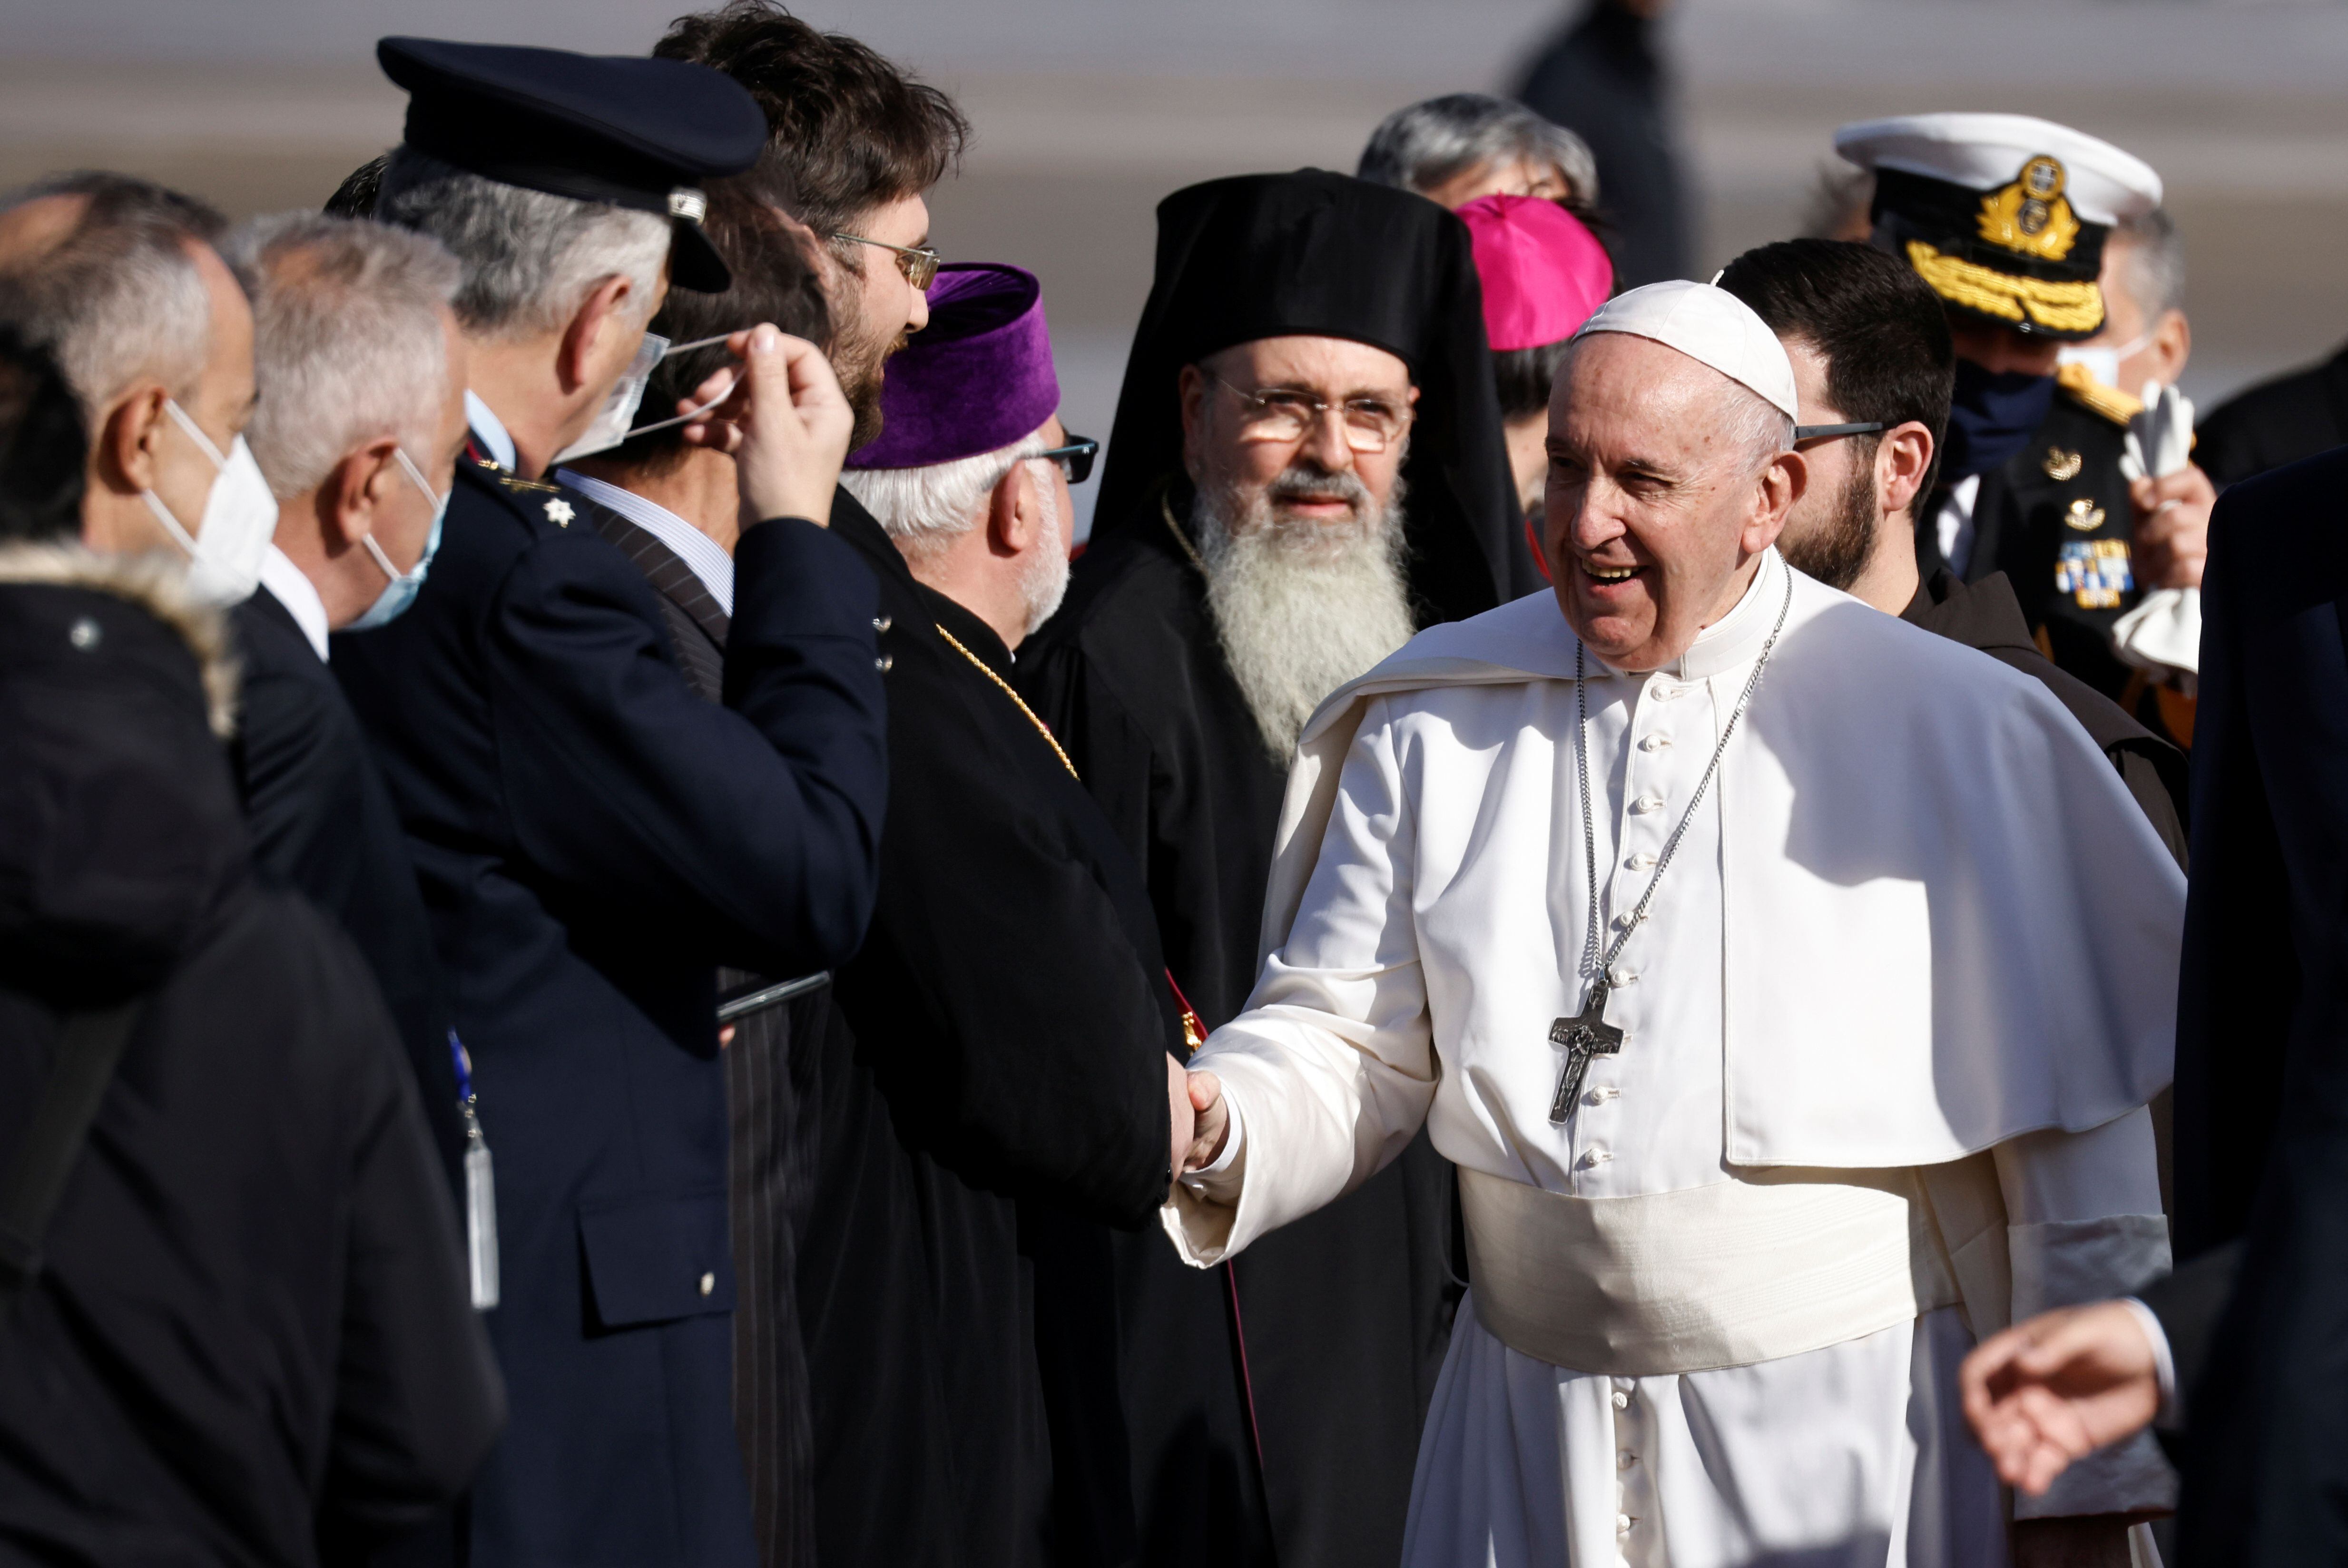 Pope Francis greets people upon arrival at the Athens International Airport in Athens, Greece, on December 4, 2021. REUTERS / Alkis Konstantinidis